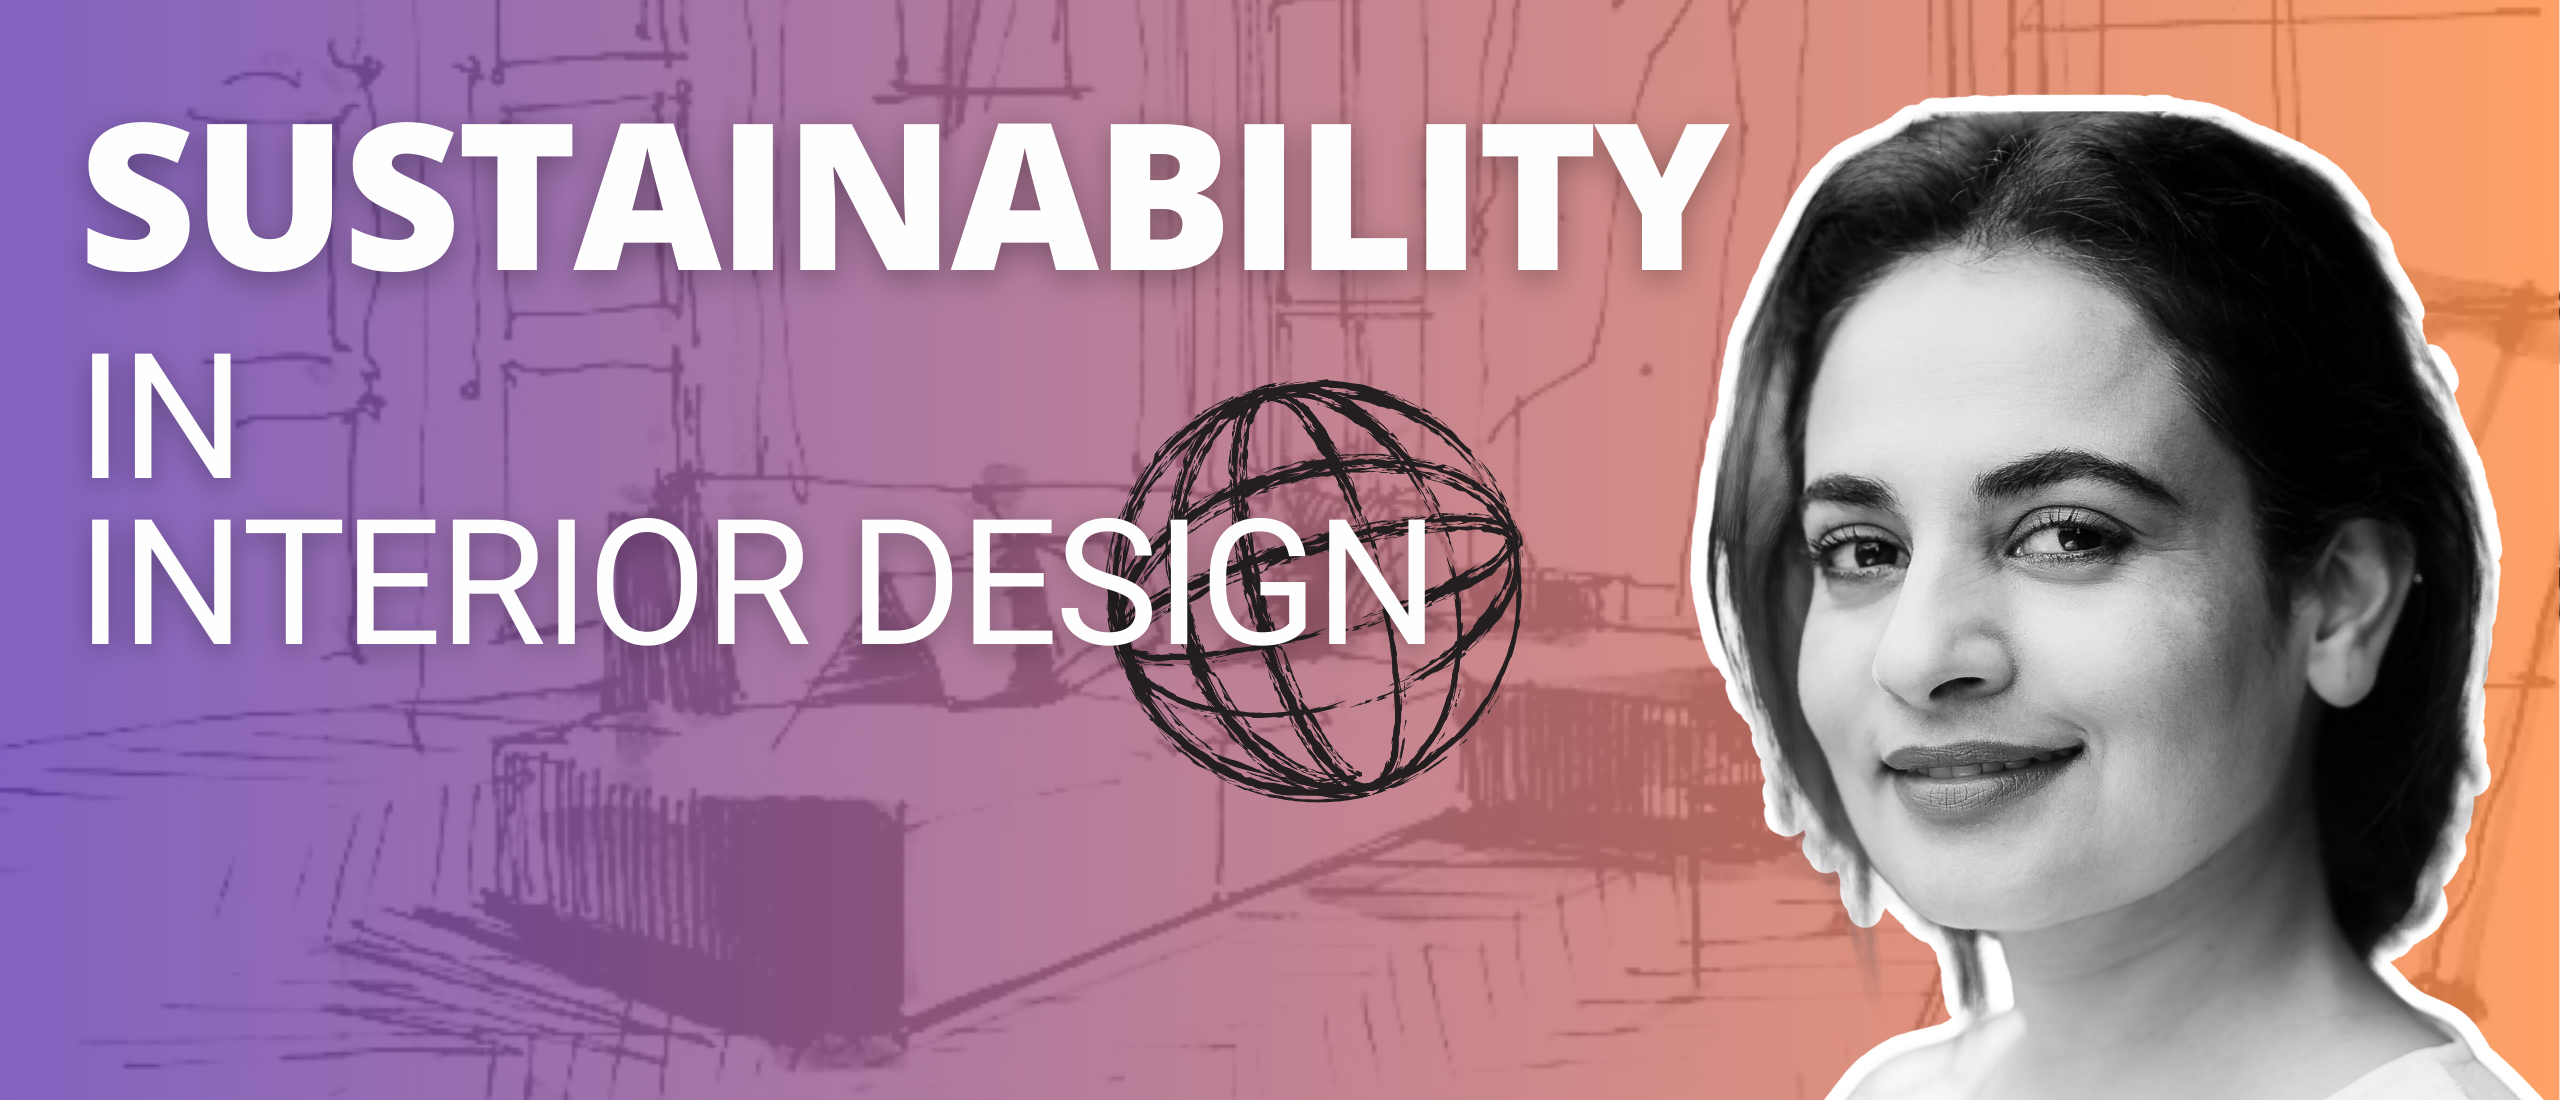 Impact and sustainability in interior design - with Ankita Dwivedi